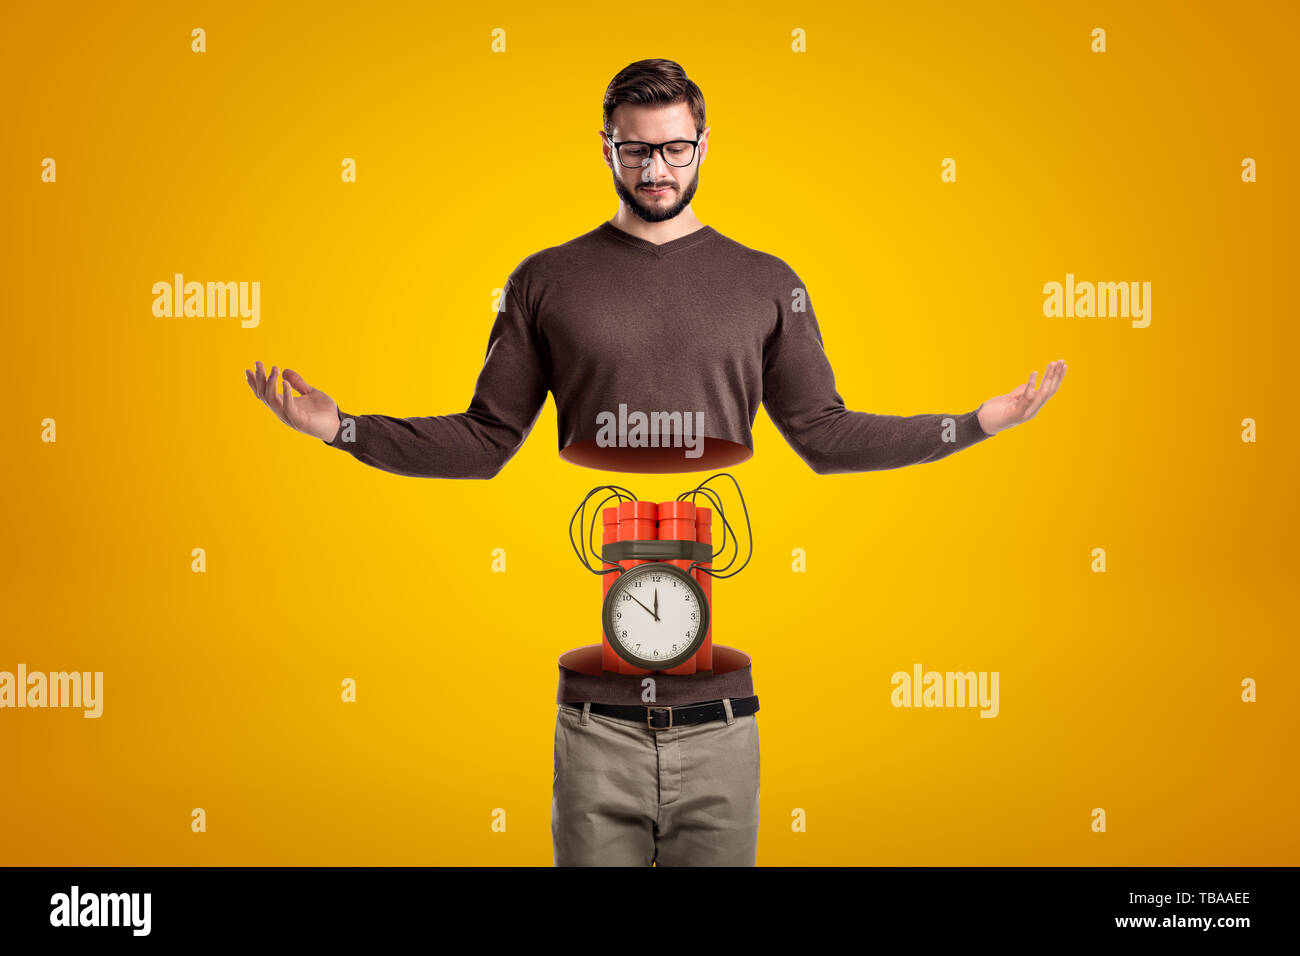 Young man in casual clothes cut in half with big red dynamite stick time bomb inside on yellow background Stock Photo